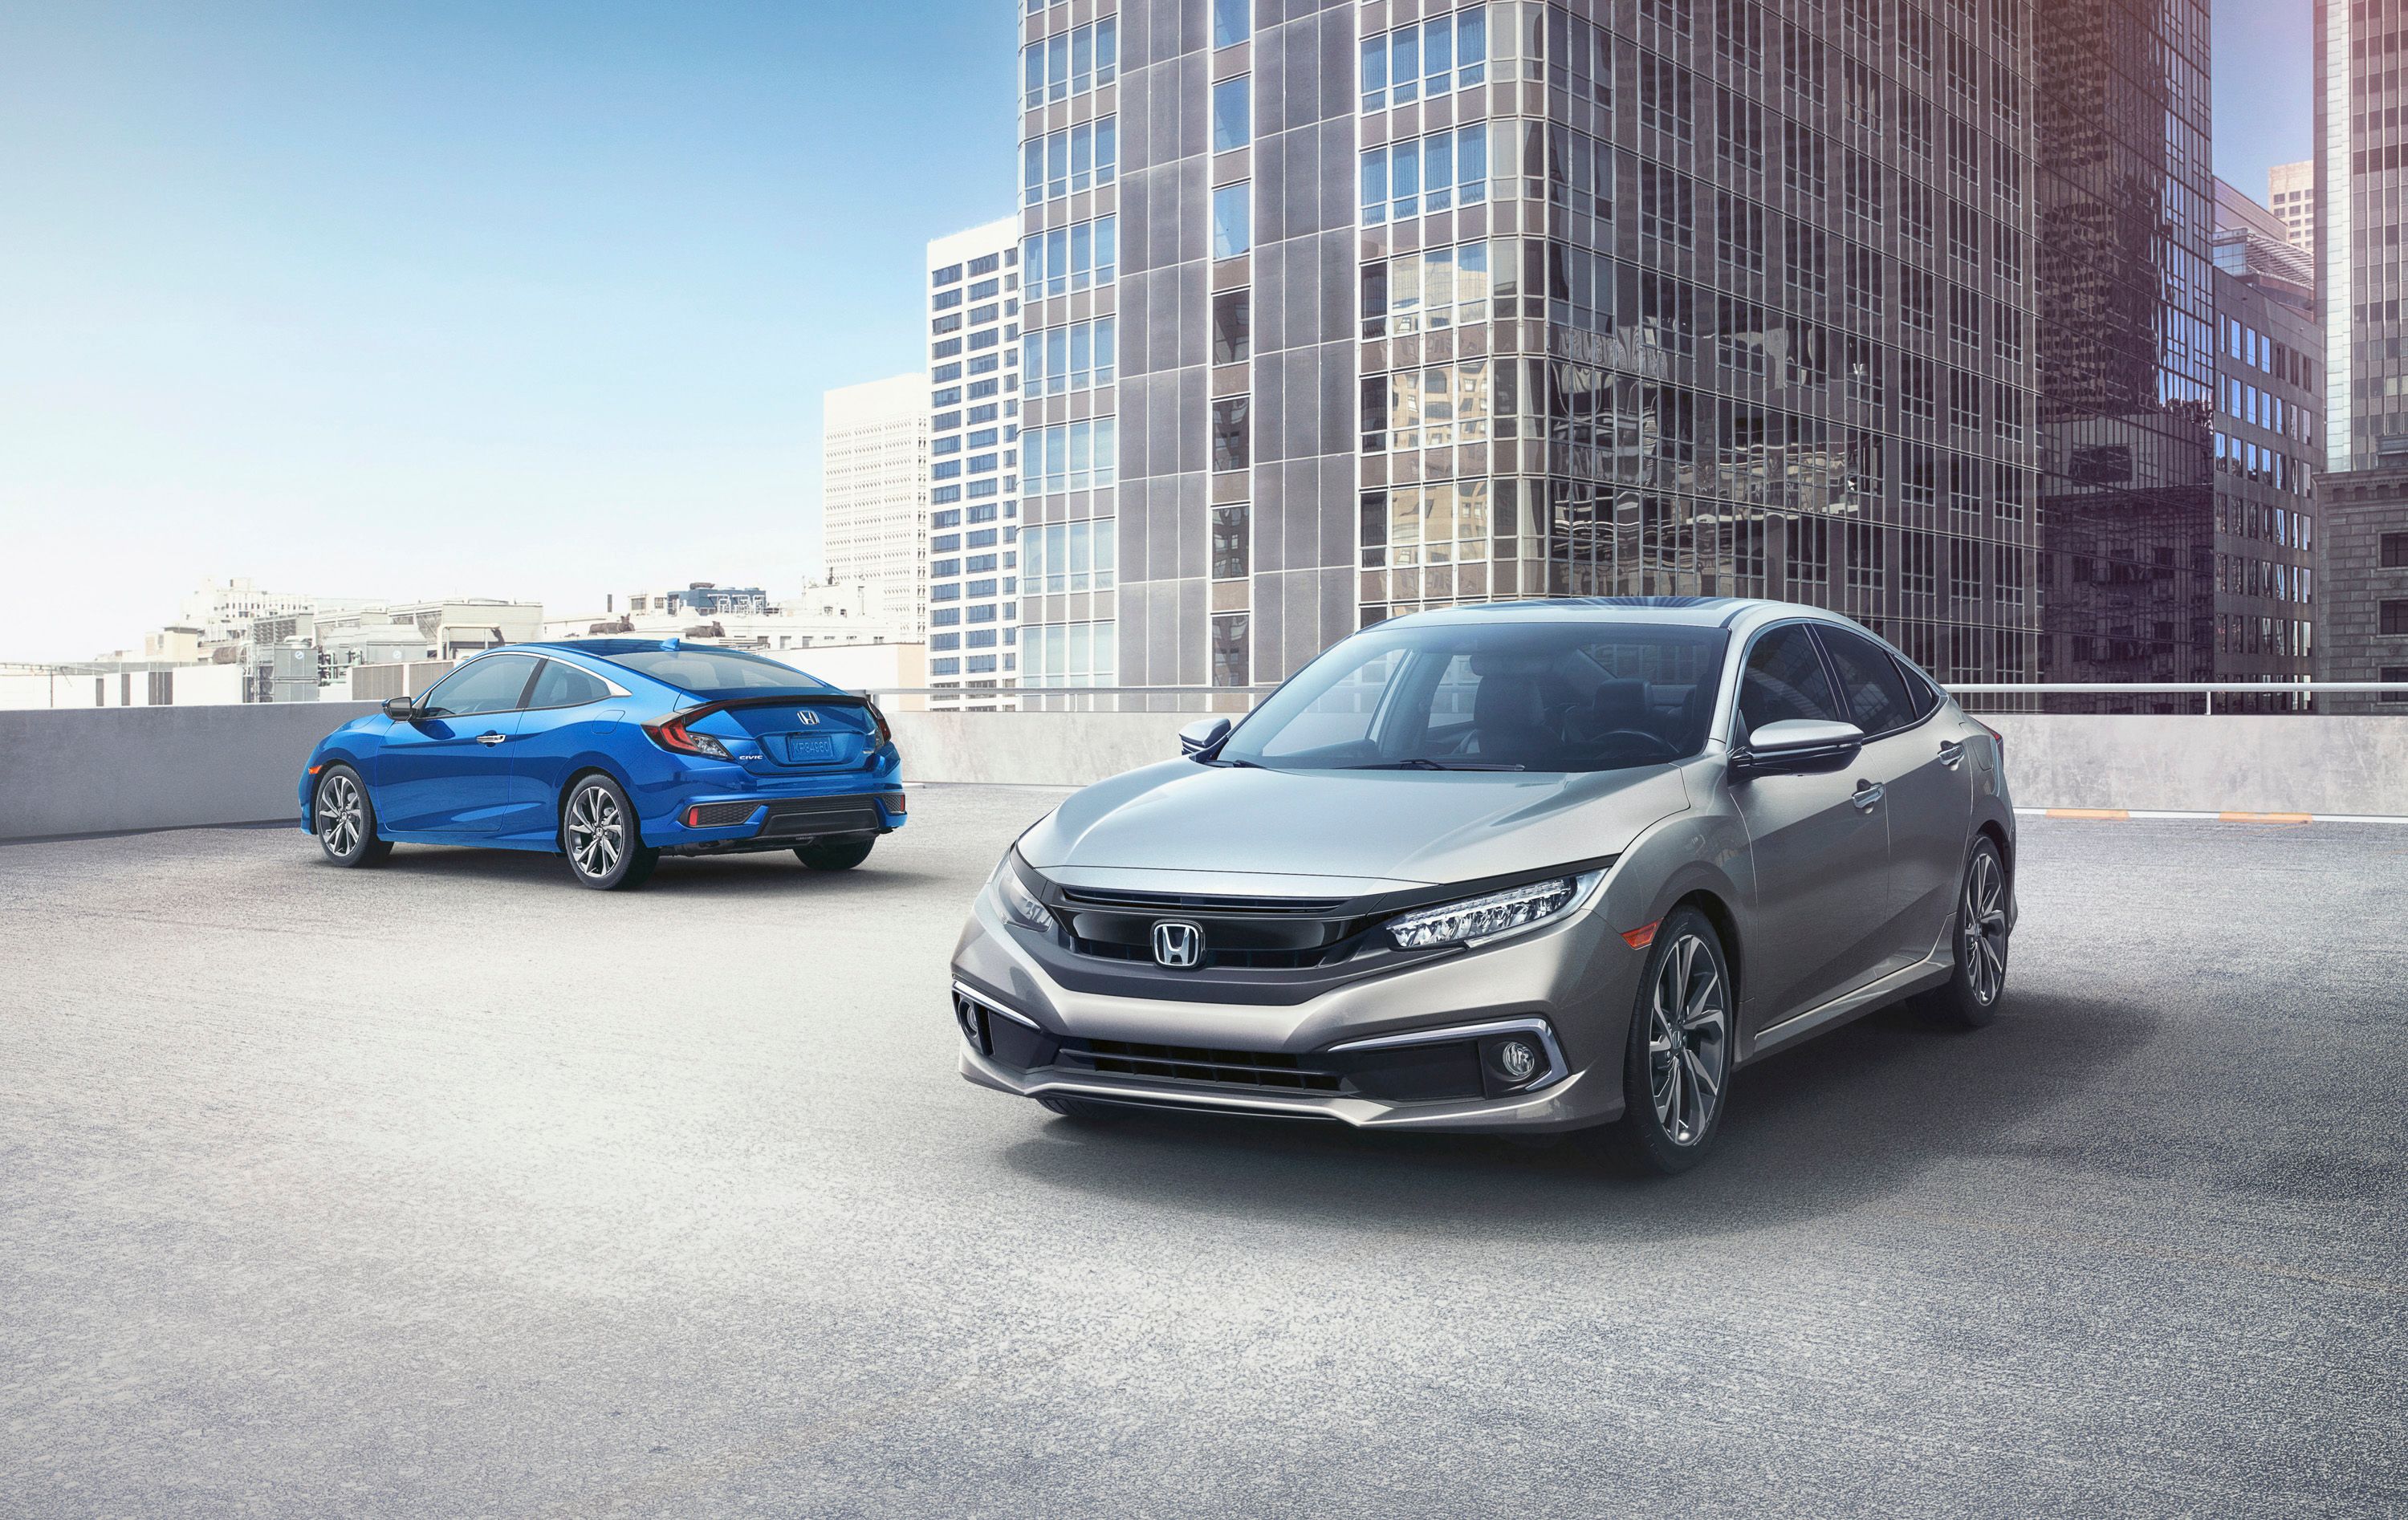 2019 The 2019 Honda Civic Is Safer and Better Looking